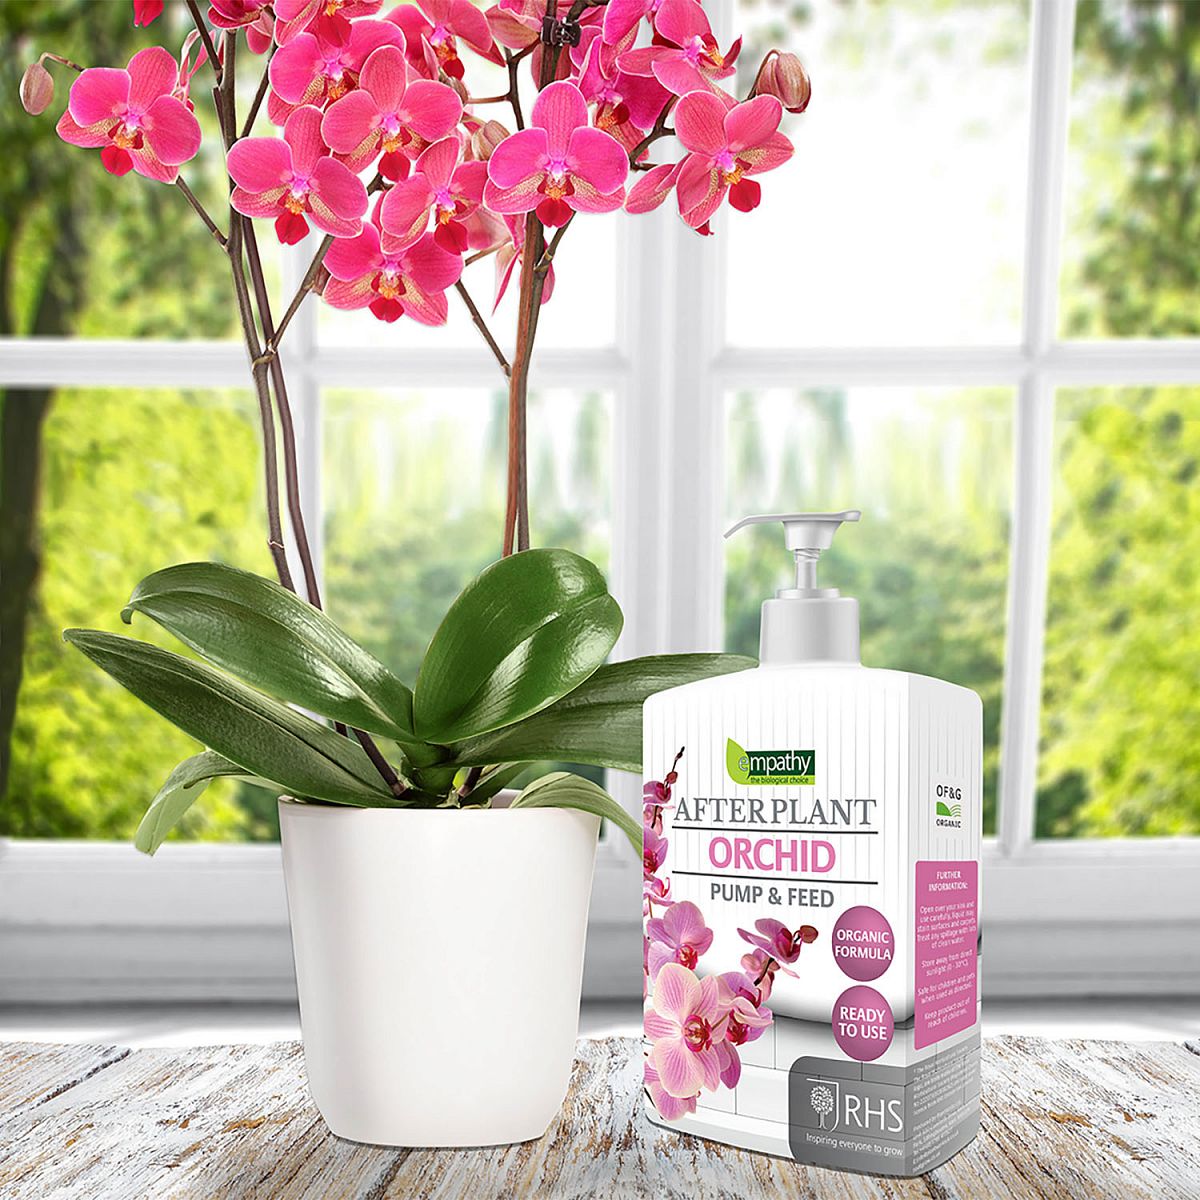 Plant Fertiliser for Orchids Empathy After Plant Organic Ready to Use Biostimulant